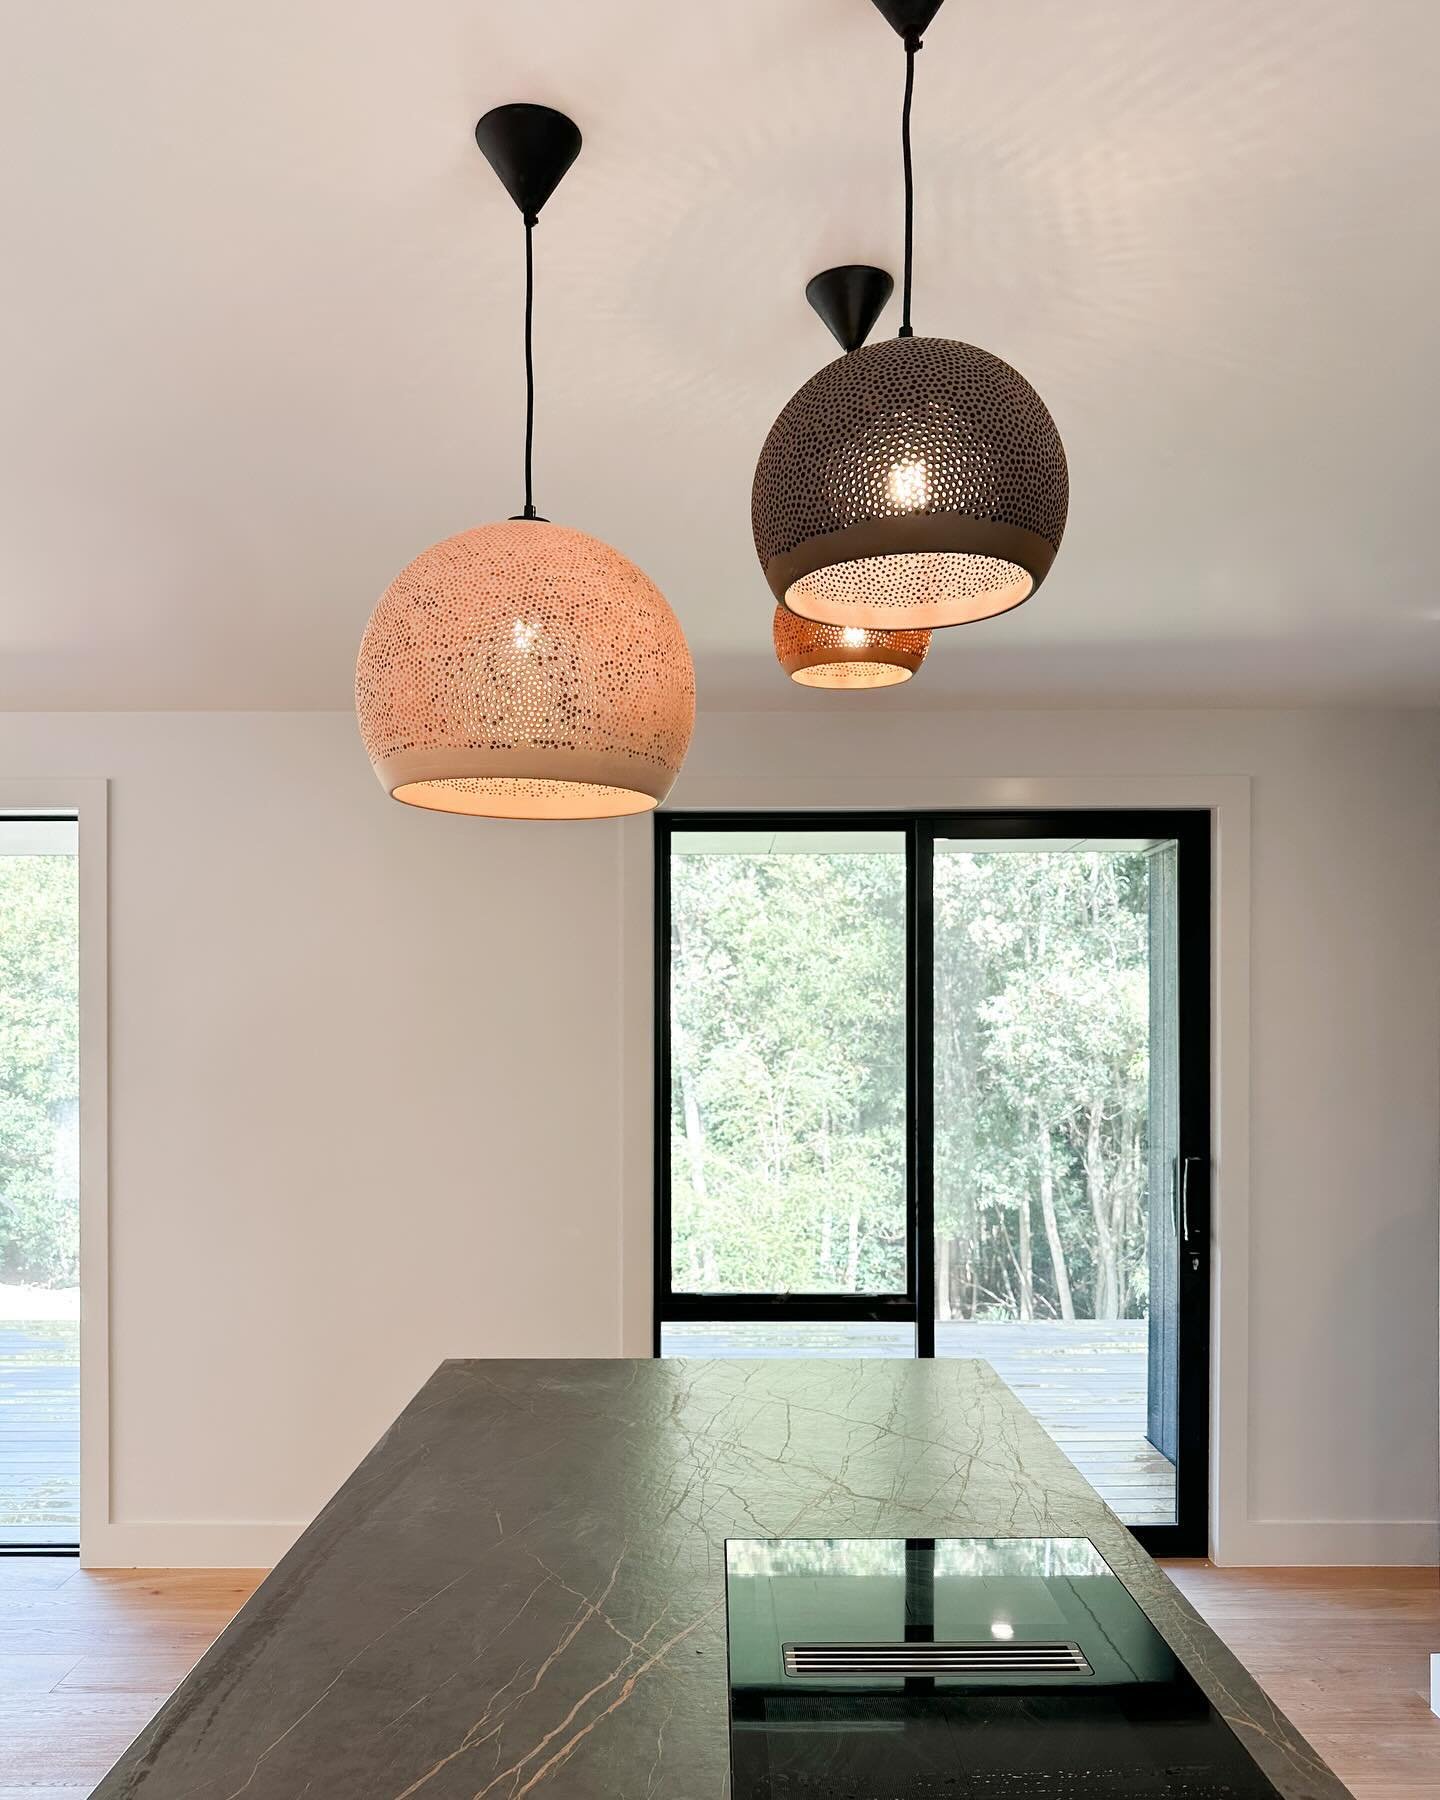 Finishing up the kitchen &amp; scullery with the bench top install and feature lighting ⚡️

This kitchen by @mastercraftnz incorporates clever joinery, hidden features and top of the line appliances. The induction cooktop is centred on the island for